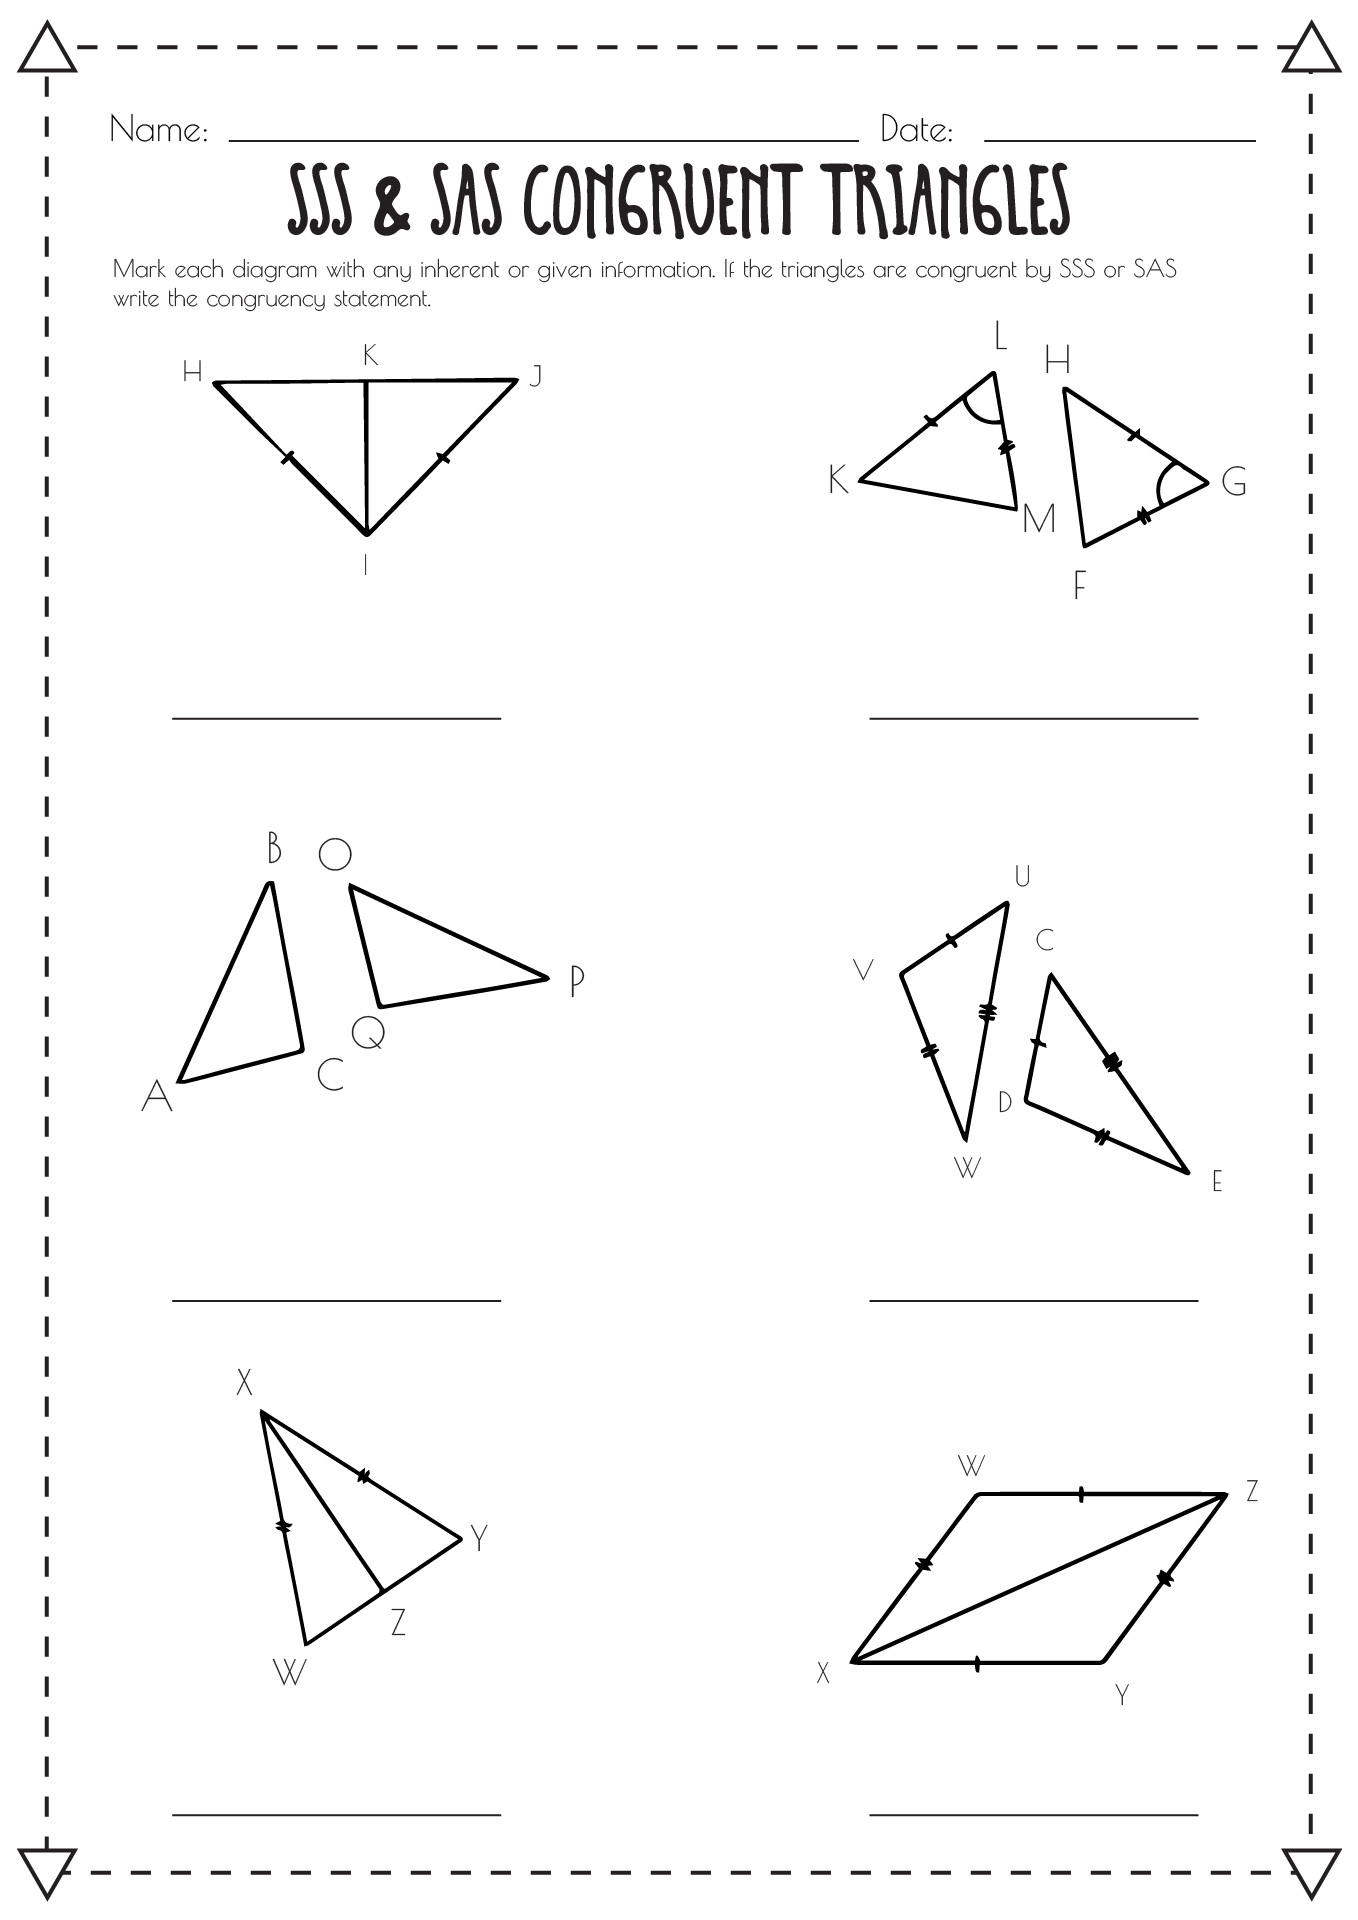 13 Best Images Of Proving Triangles Congruent Worksheet SSS And SAS Congruent Triangles 